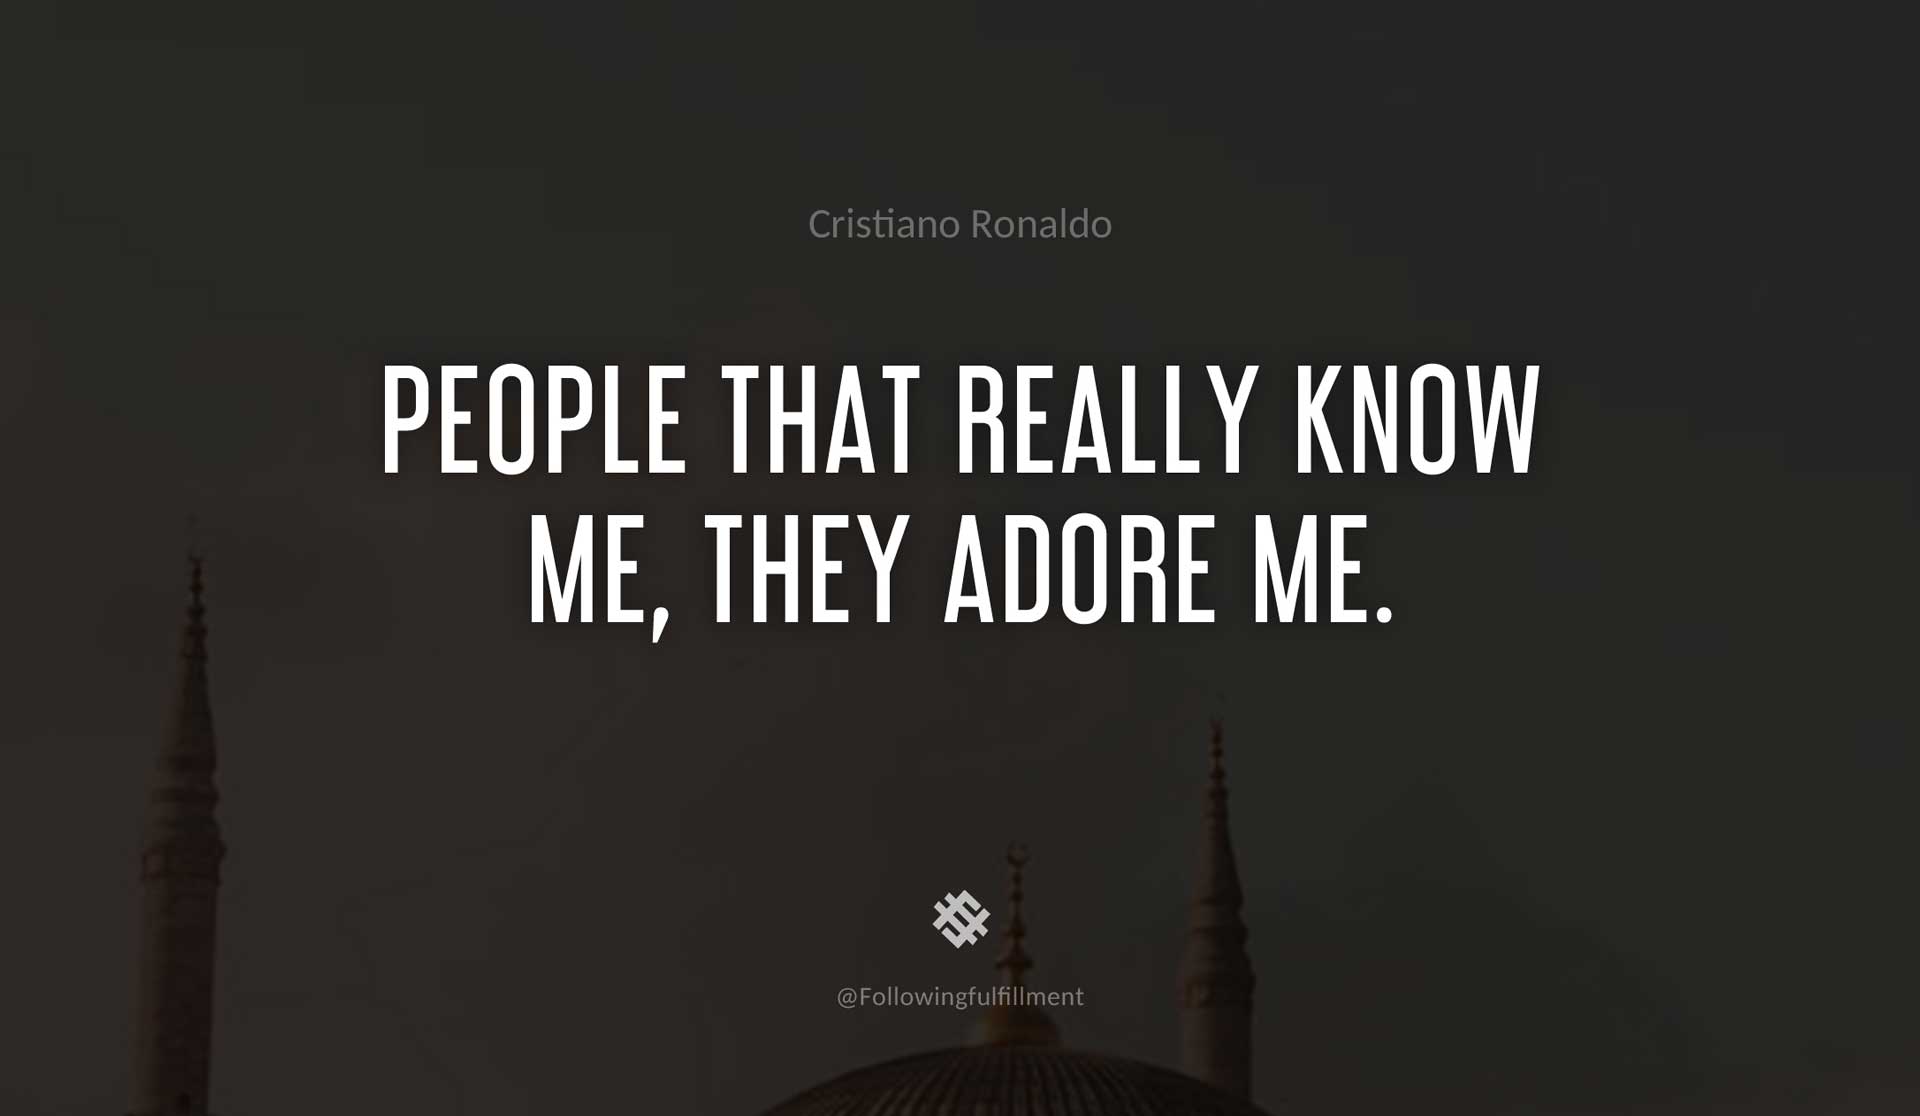 People-that-really-know-me,-they-adore-me.-CRISTIANO-RONALDO-Quote.jpg